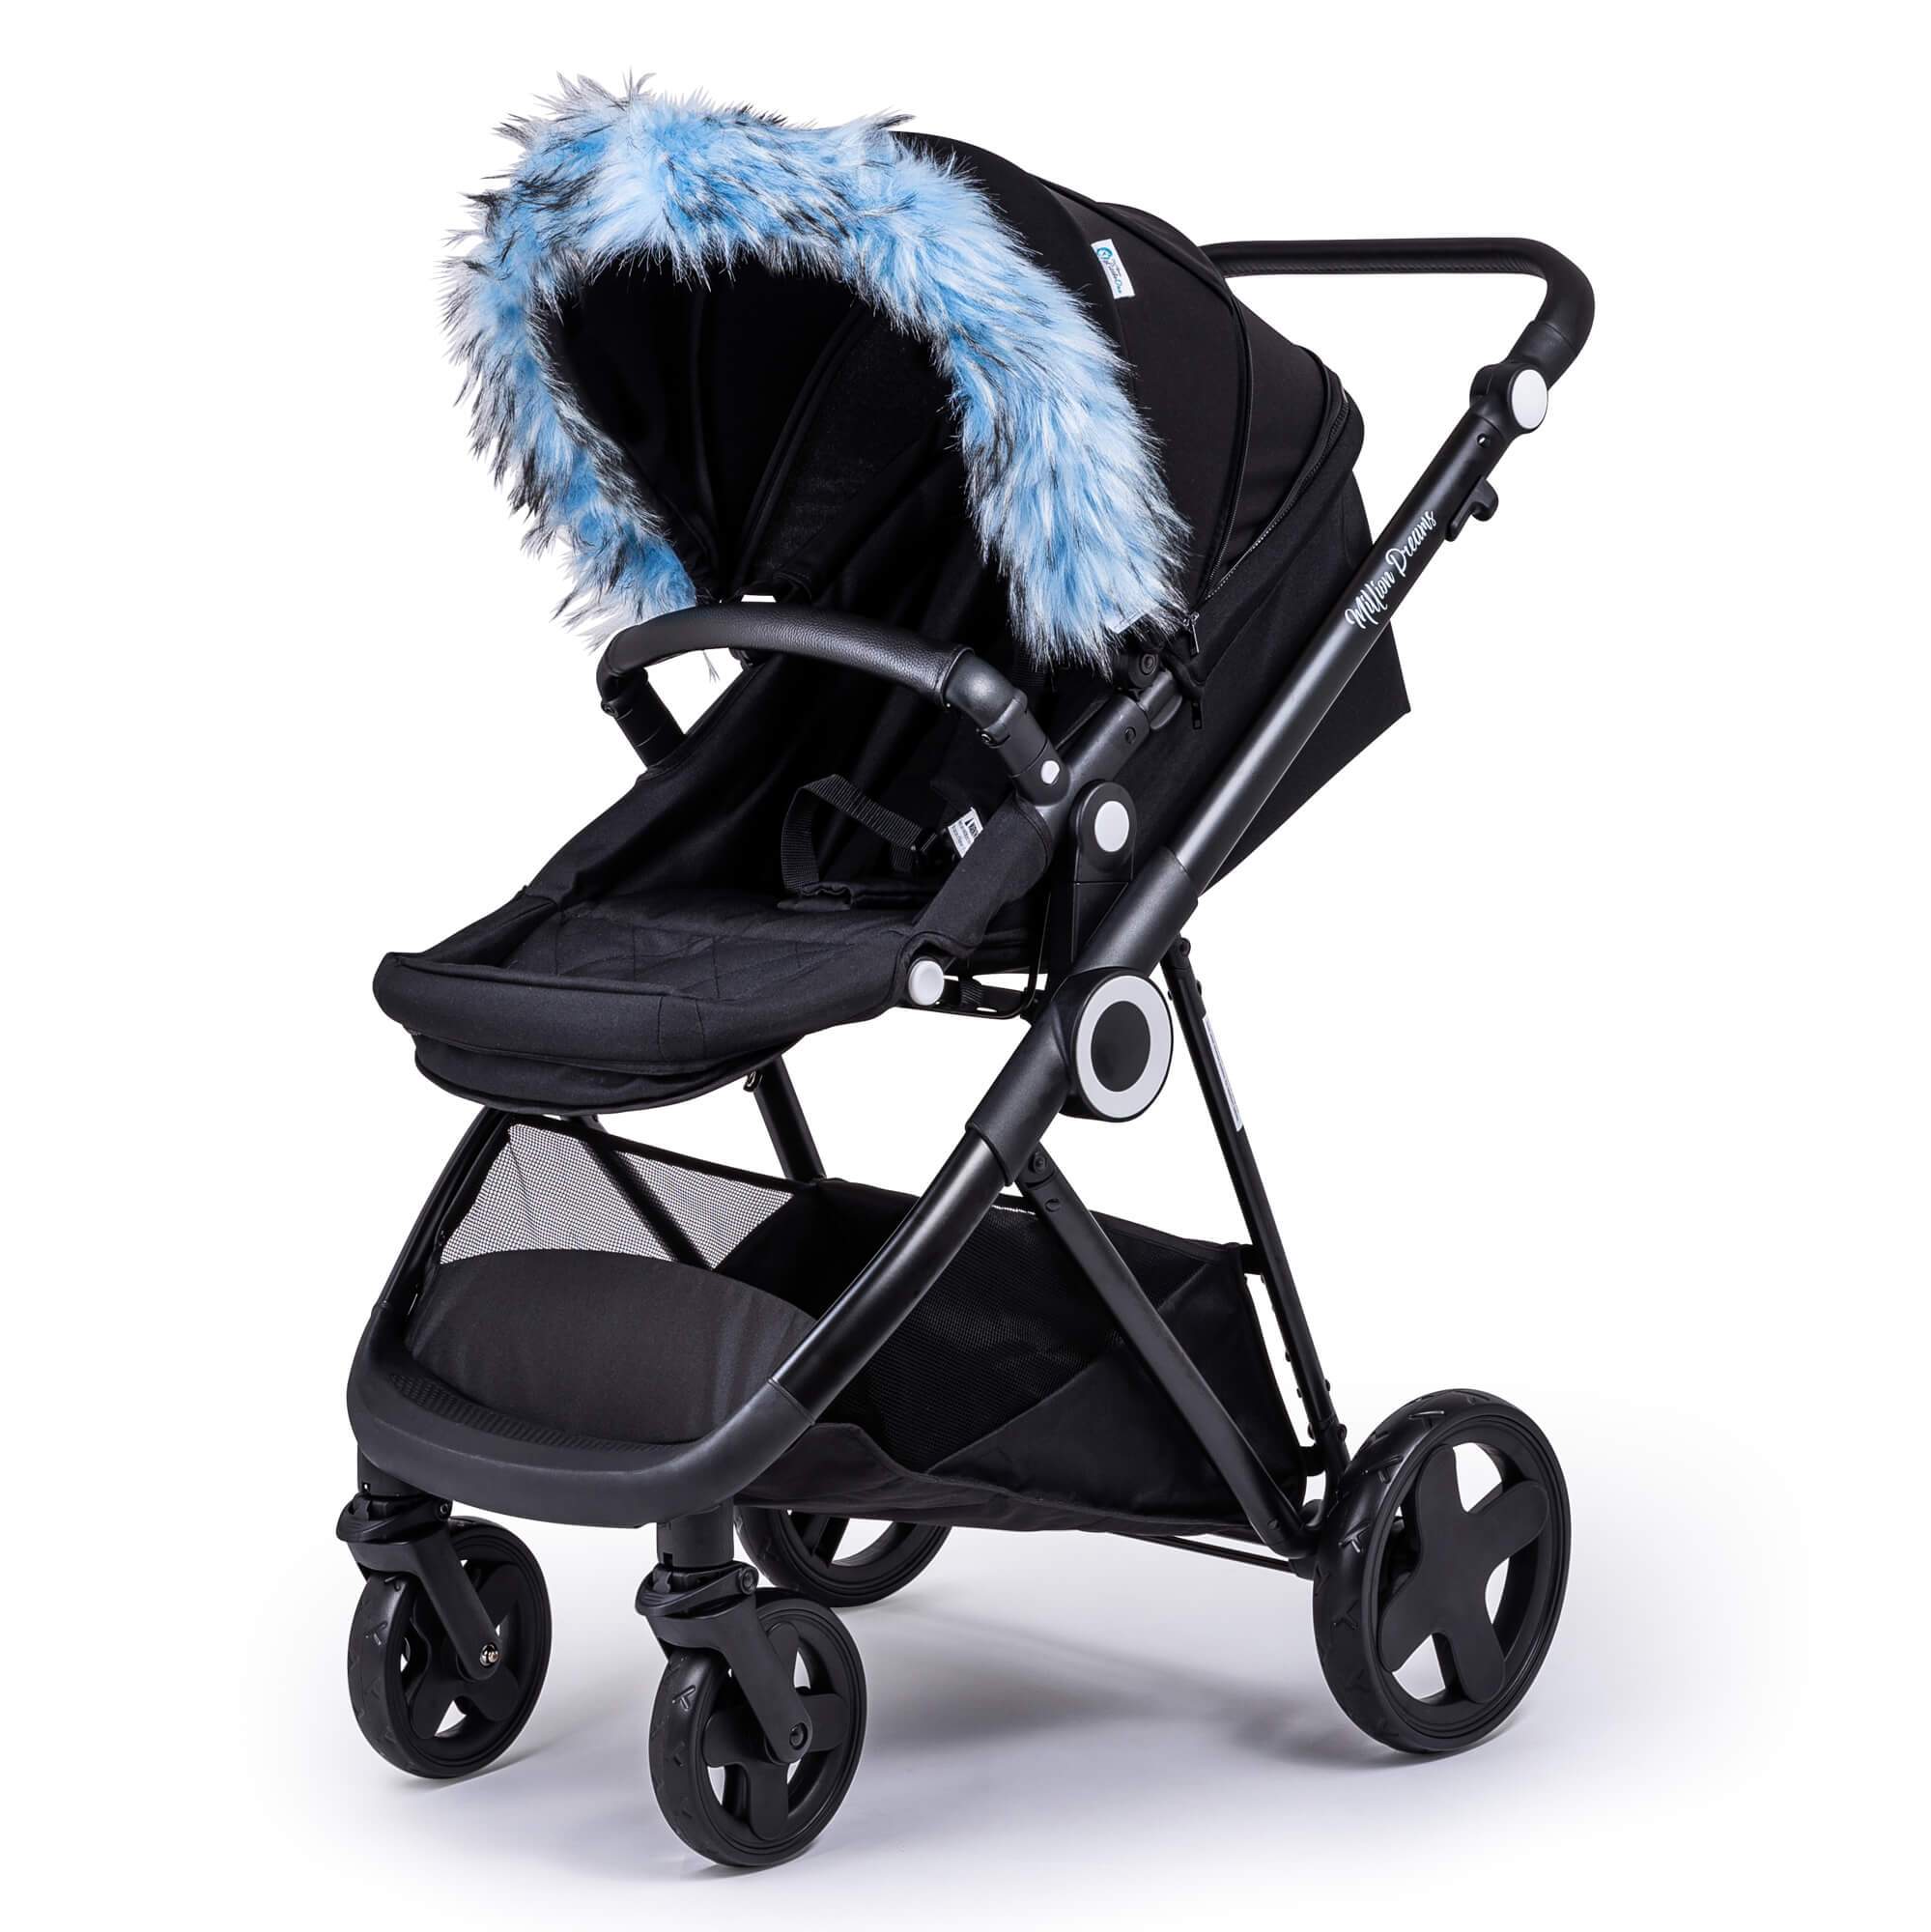 Pram Fur Hood Trim Attachment For Pushchair Compatible with Kiddy - Light Blue / Fits All Models | For Your Little One